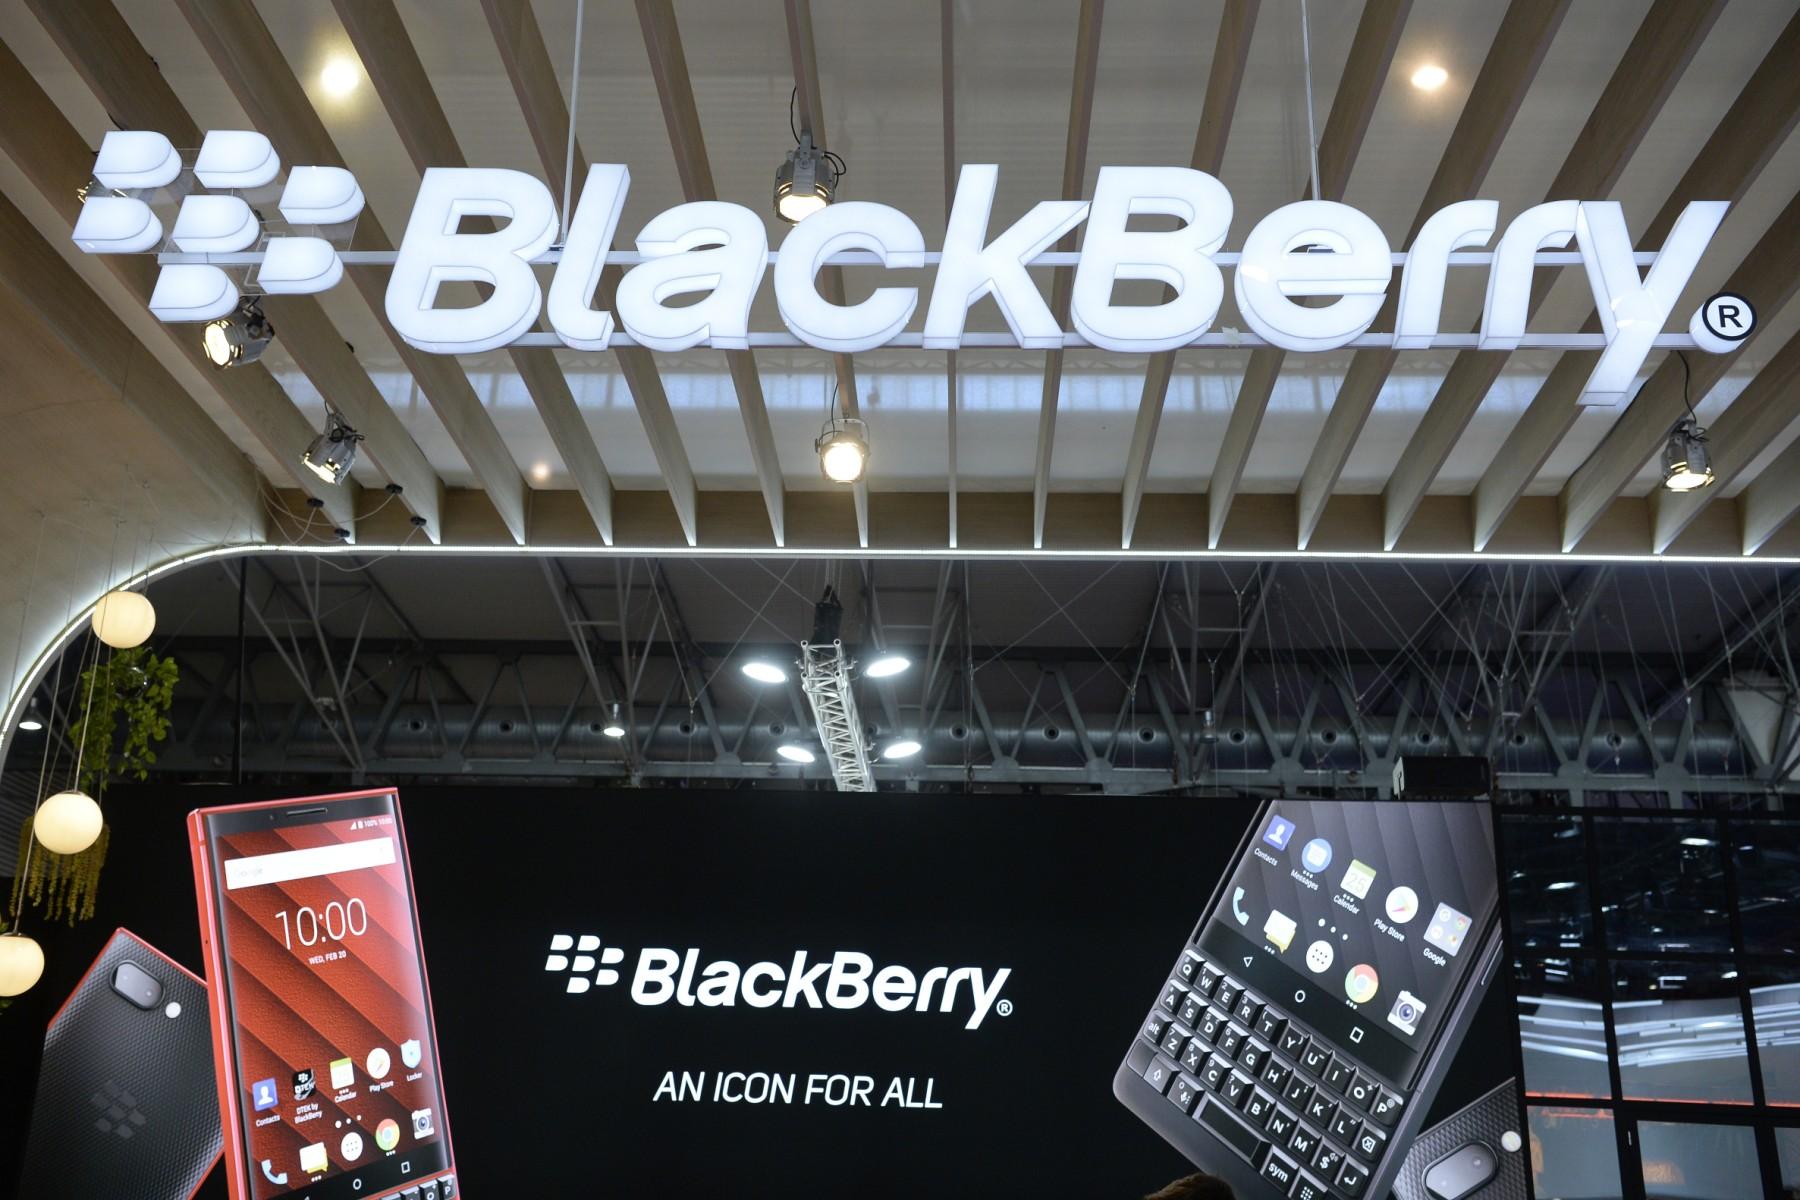 The BlackBerry logo is displayed at the Mobile World Congress in Barcelona on Feb 27, 2019. Blackberry lost favour with users with the advent of Apple's touchscreen iPhones and rival Android devices. Photo: AFP